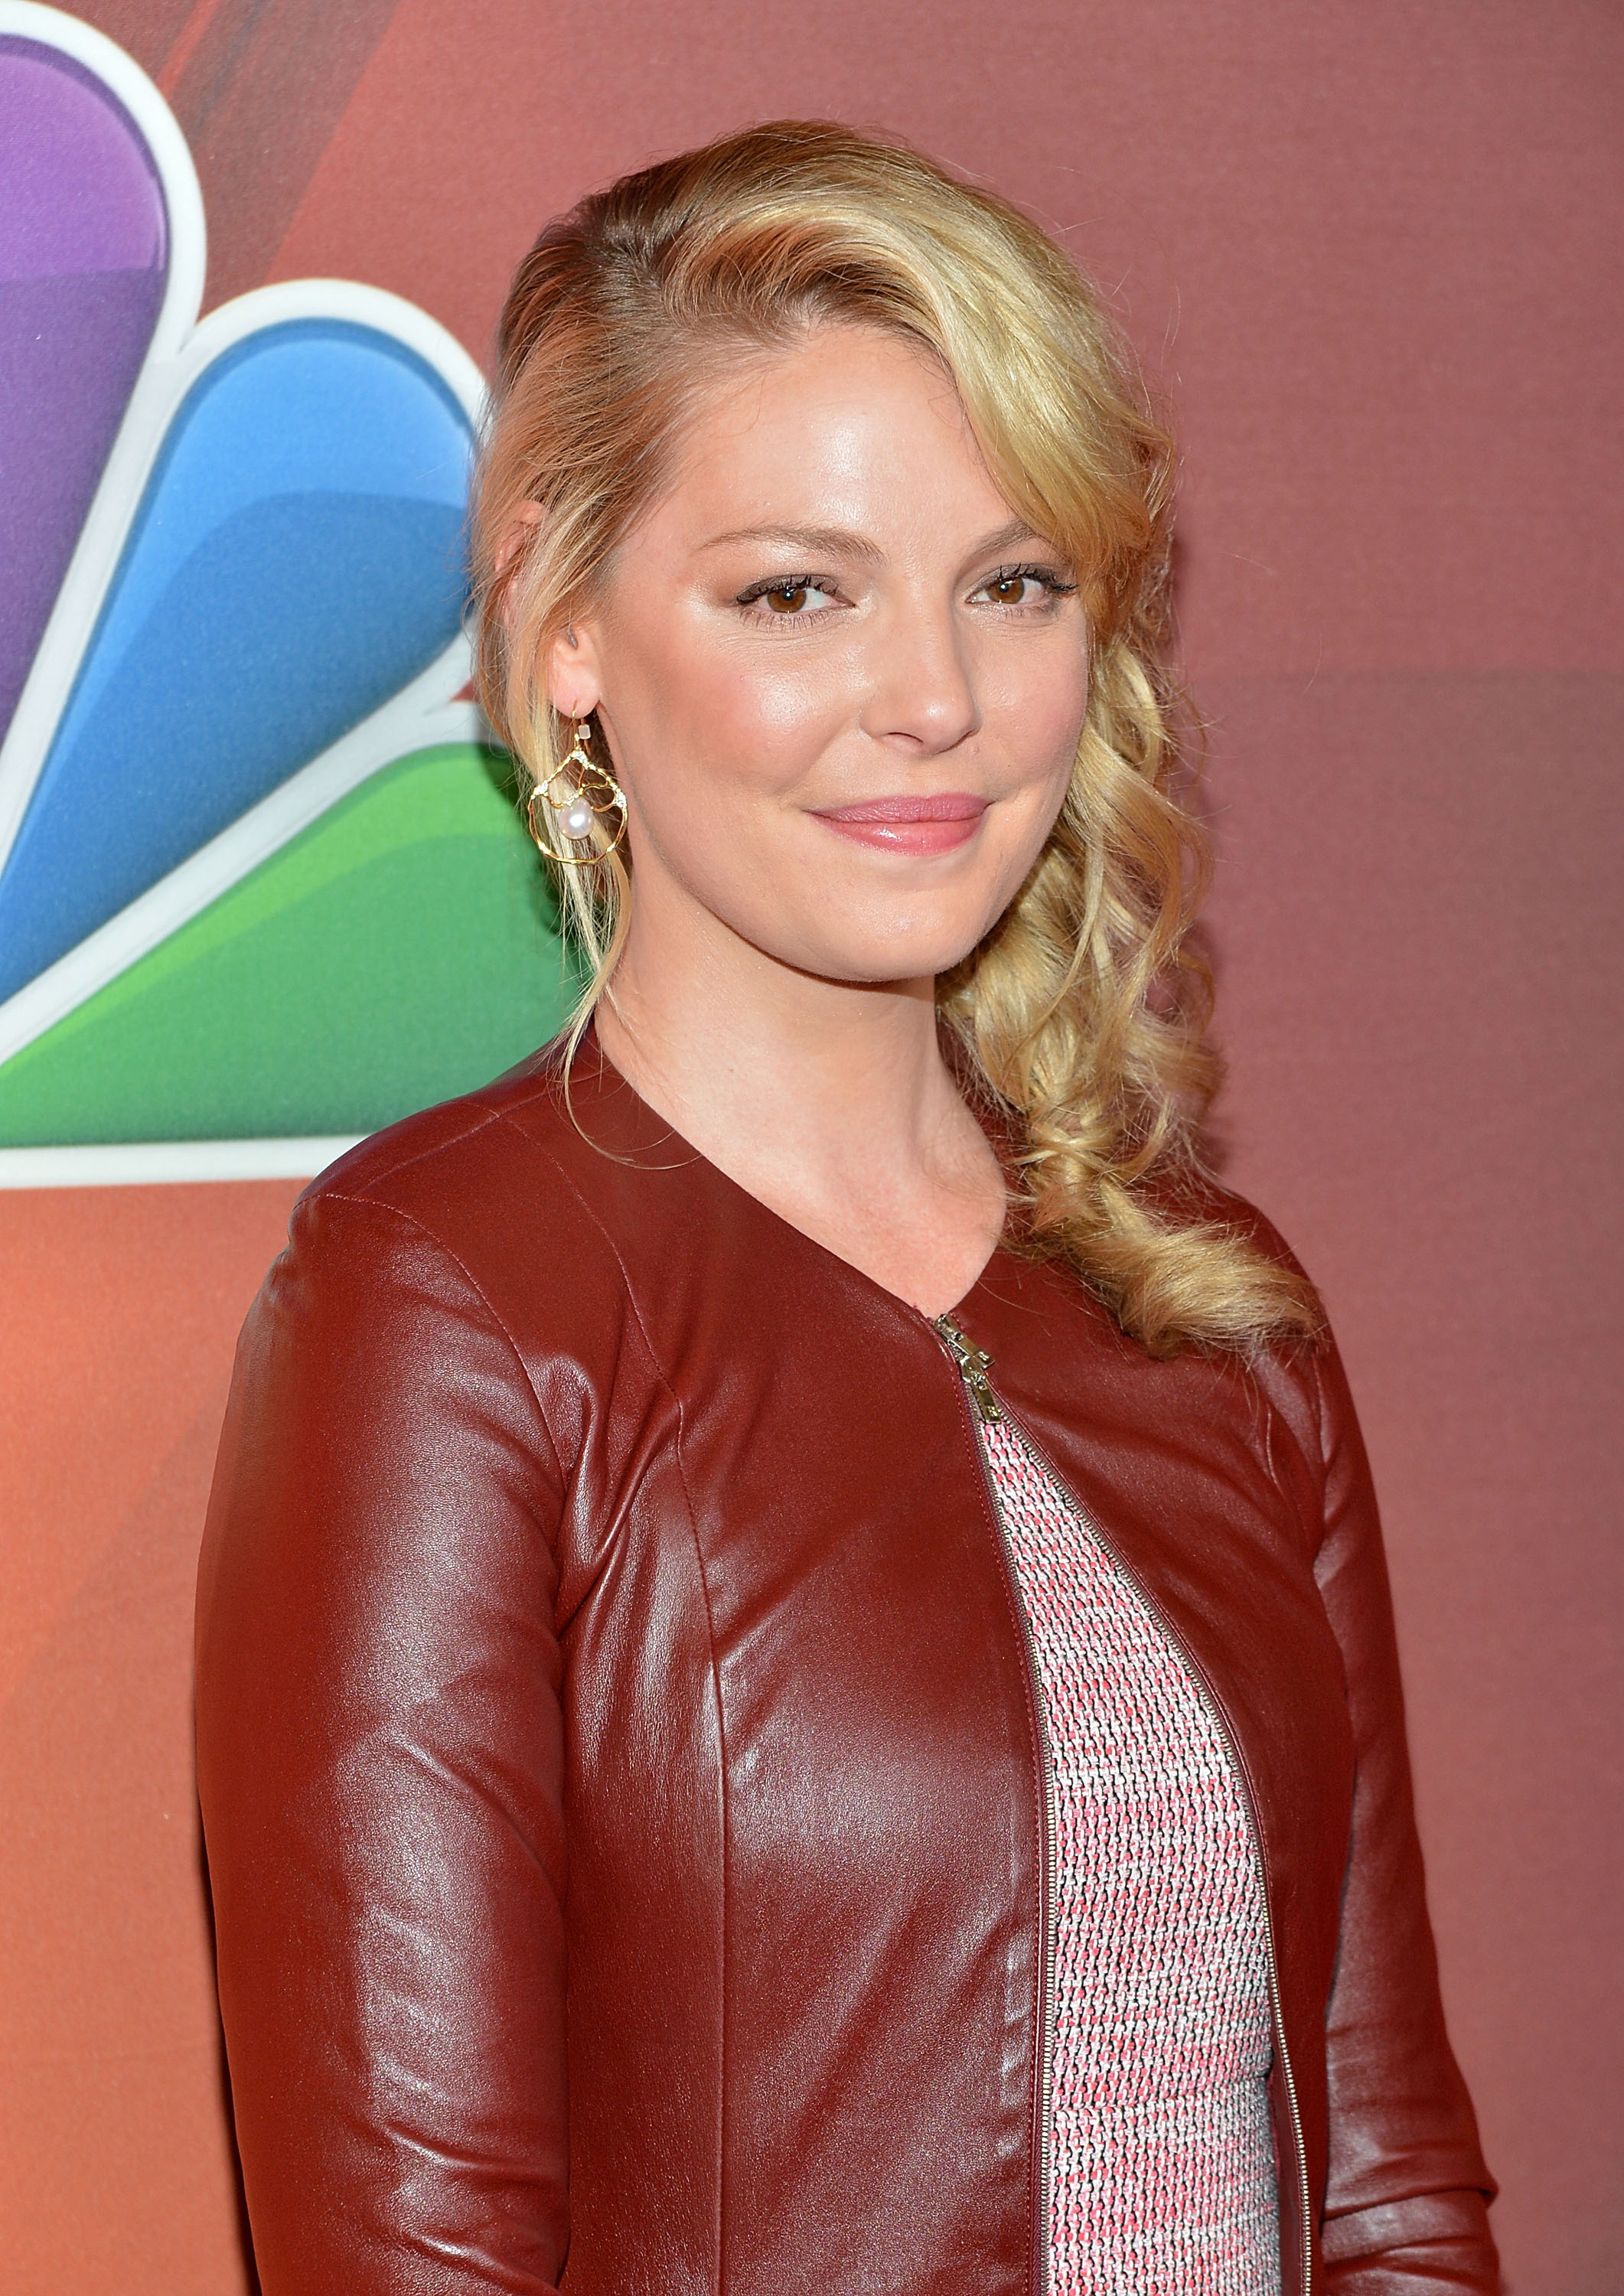 Actress Katherine Heigl attends the 2014 NBC Upfront Presentation at The Jacob K. Javits Convention Center on May 12, 2014 in New York City.